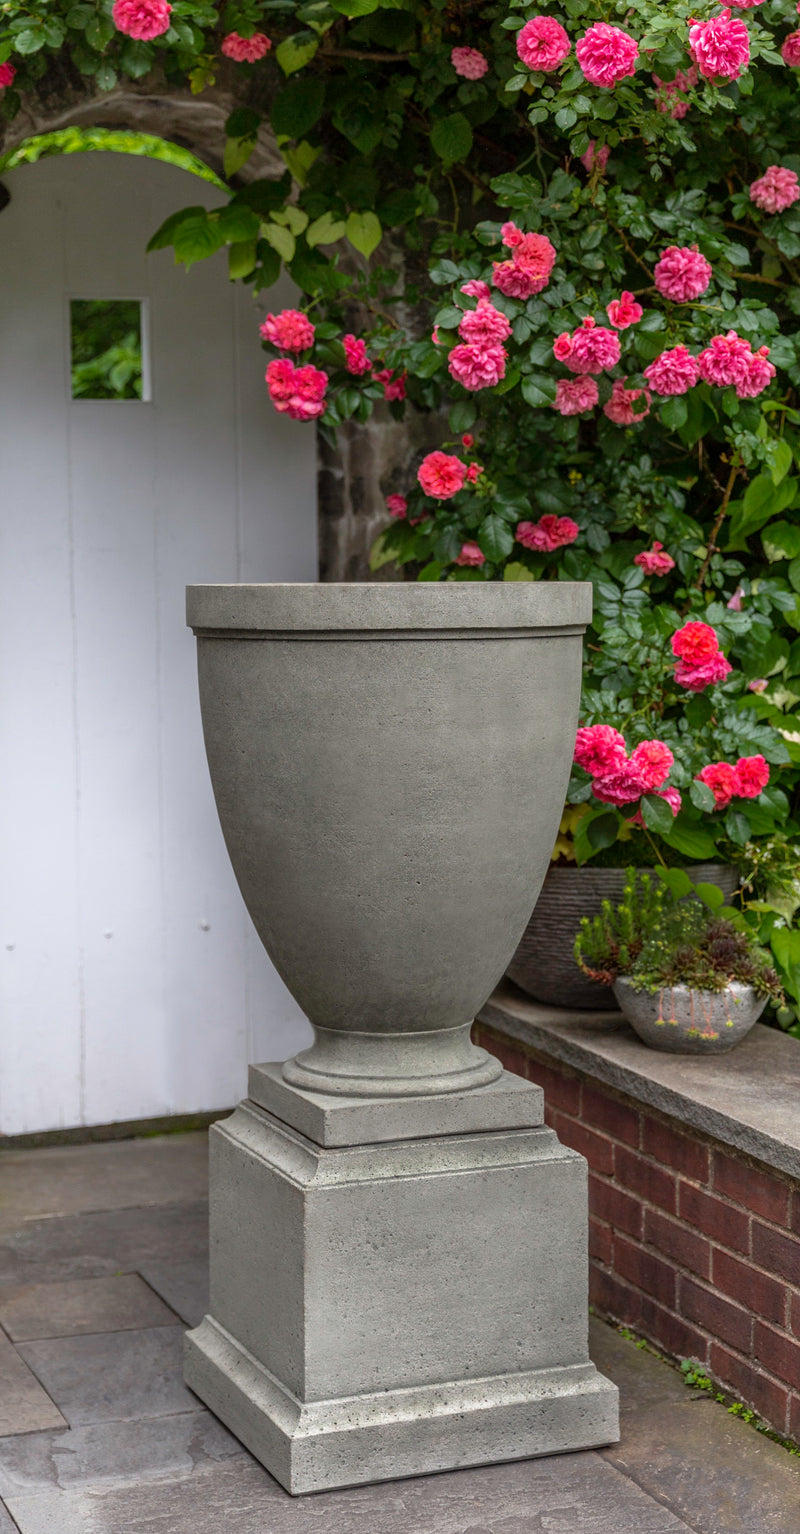 Square pedestal shown with an urn in front of rose shrub